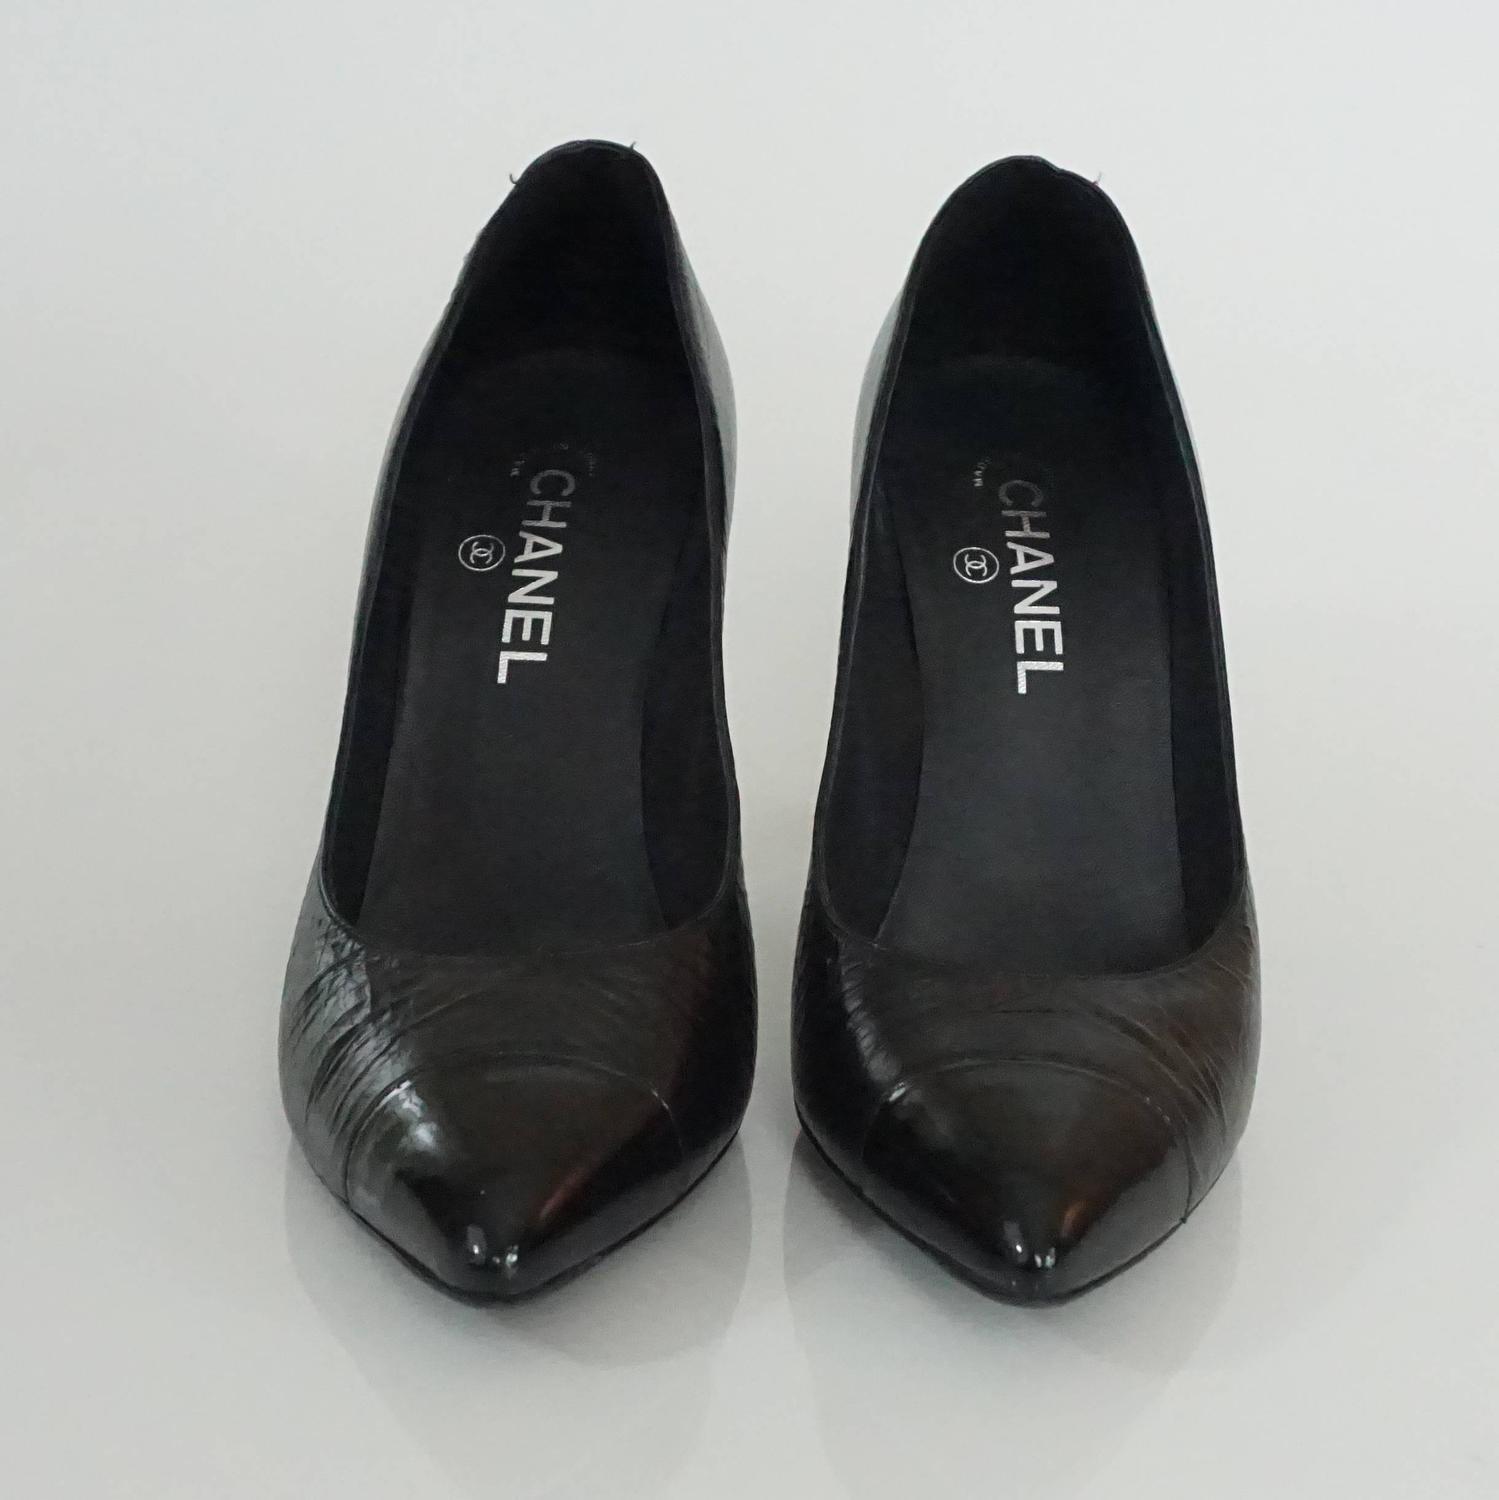 Chanel Black Leather and Patent Pump w/ Rope Knot Heel - 40.5 For Sale ...